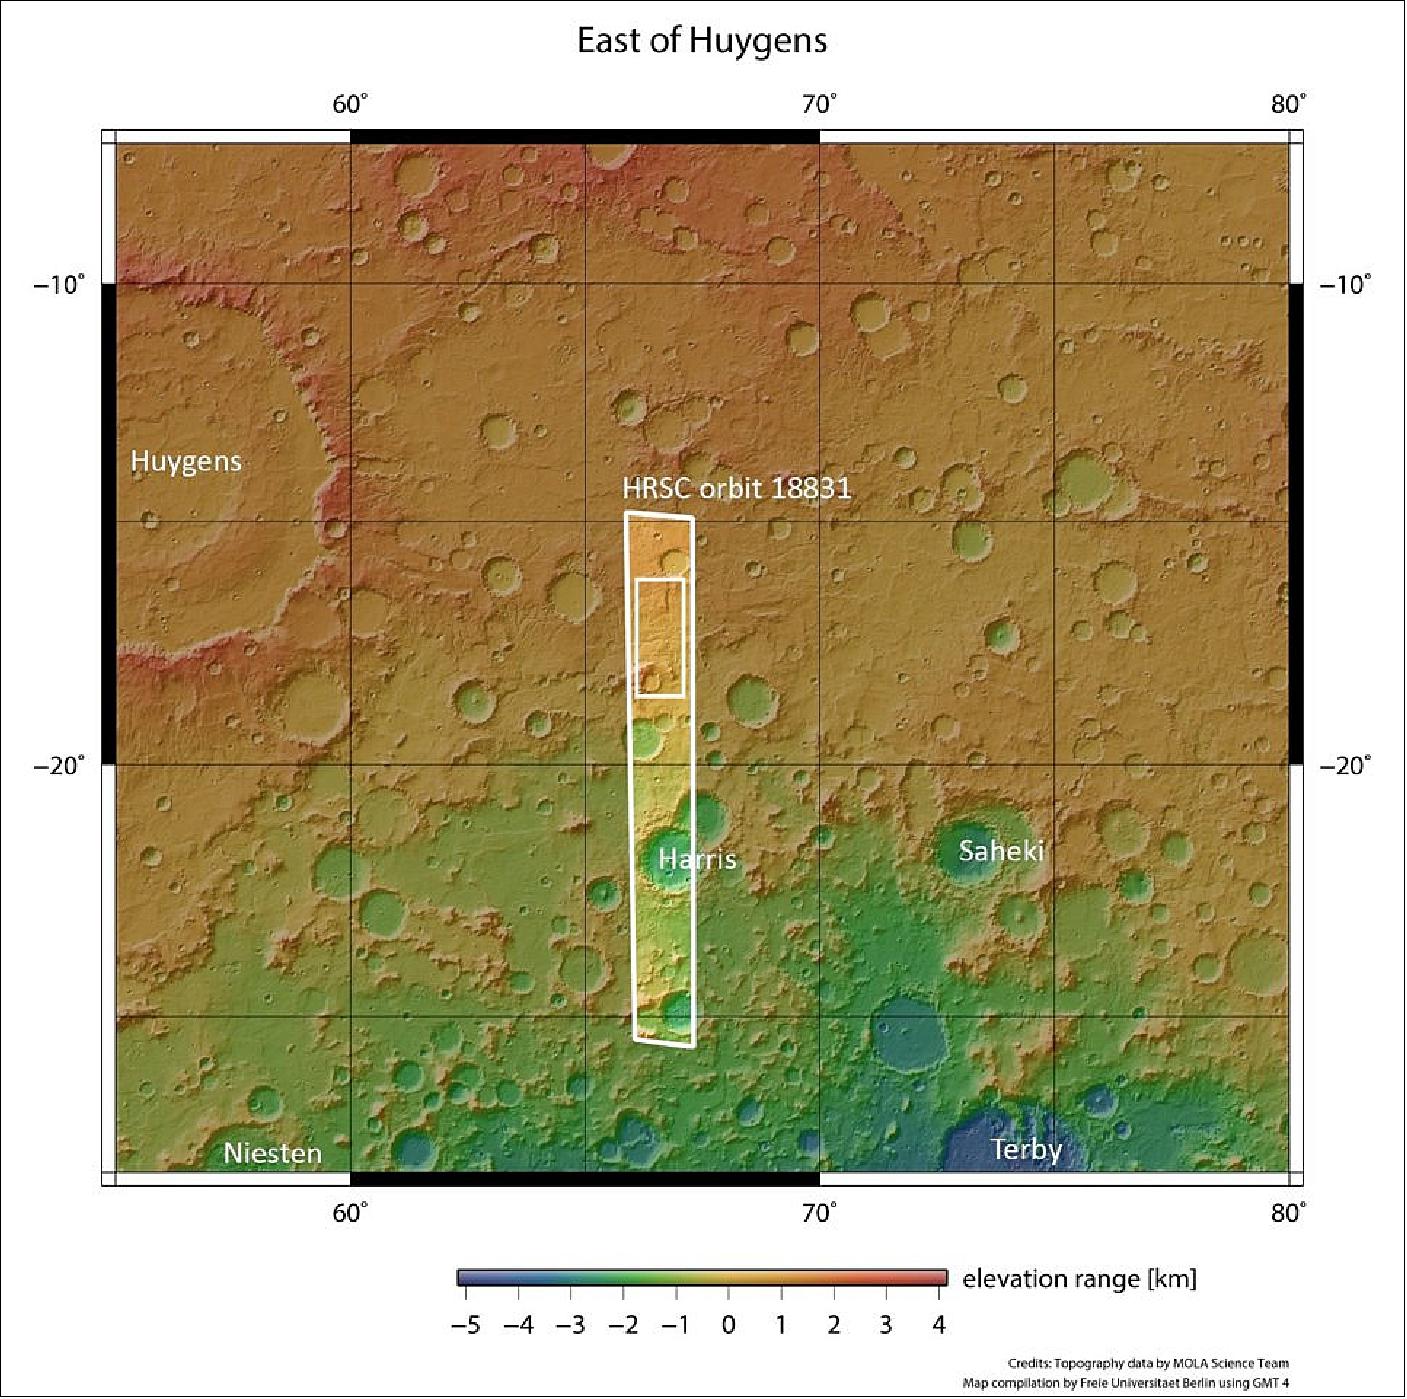 Figure 55: This image shows the landscape in and around a network of dried-up valleys on Mars. The region outlined by the bold white box indicates the area imaged by the Mars Express High Resolution Stereo Camera on 19 November 2018 during orbit 18831. The different colors across the frame represent the elevation of the terrain, as indicated by the bar at the bottom (image credit: Topography: NASA MGS MOLA Science Team; Map compilation: Freie Universitat Berlin)